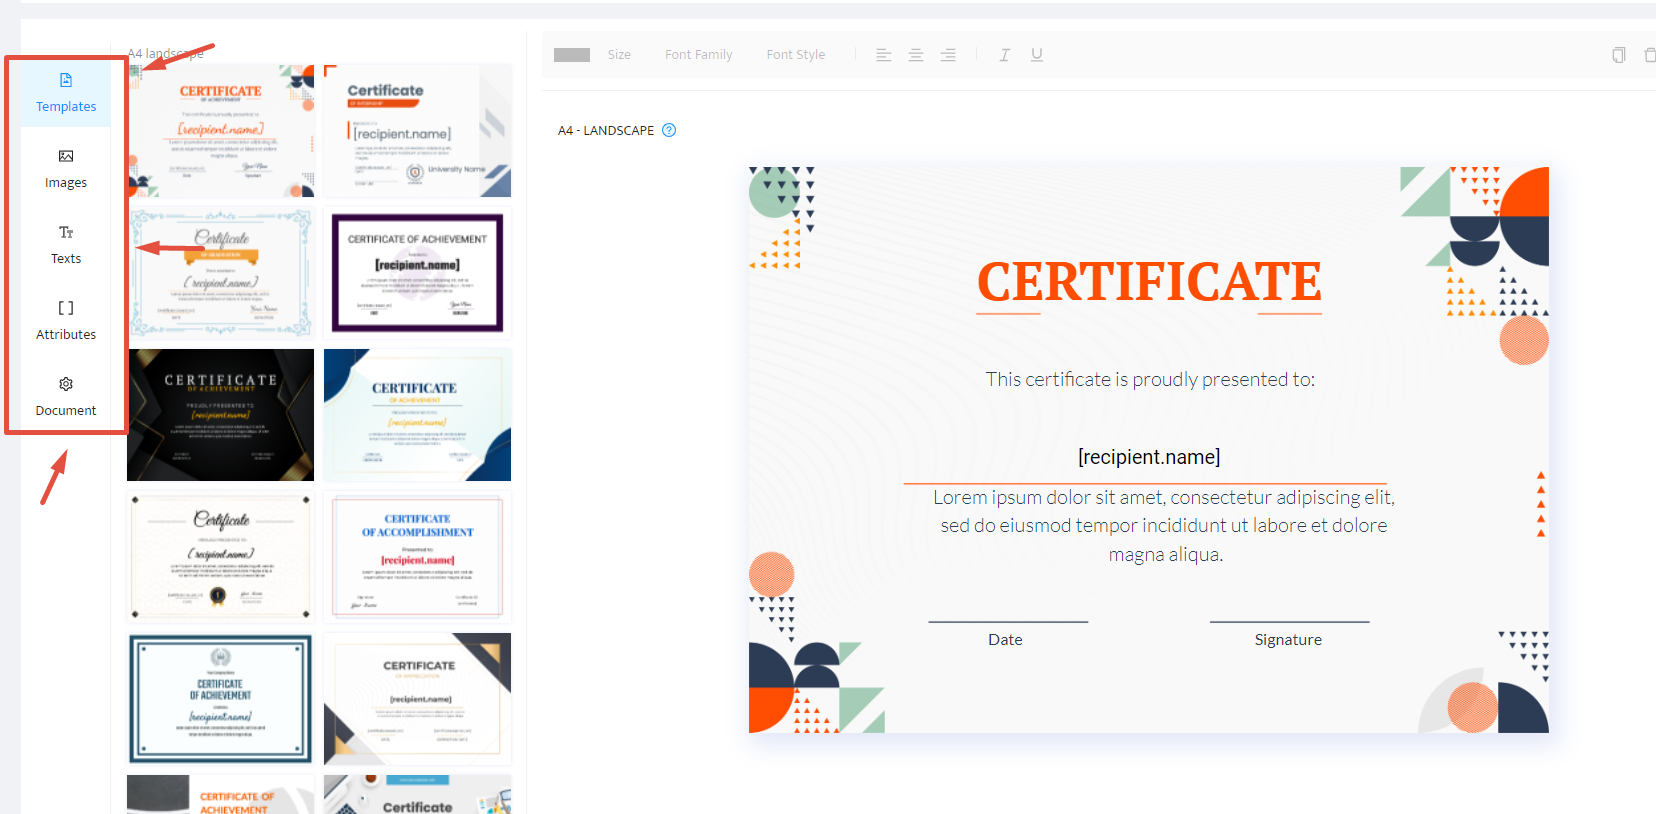 how-to-make-your-own-certificate-in-5-easy-steps-certifier-creating-process.png